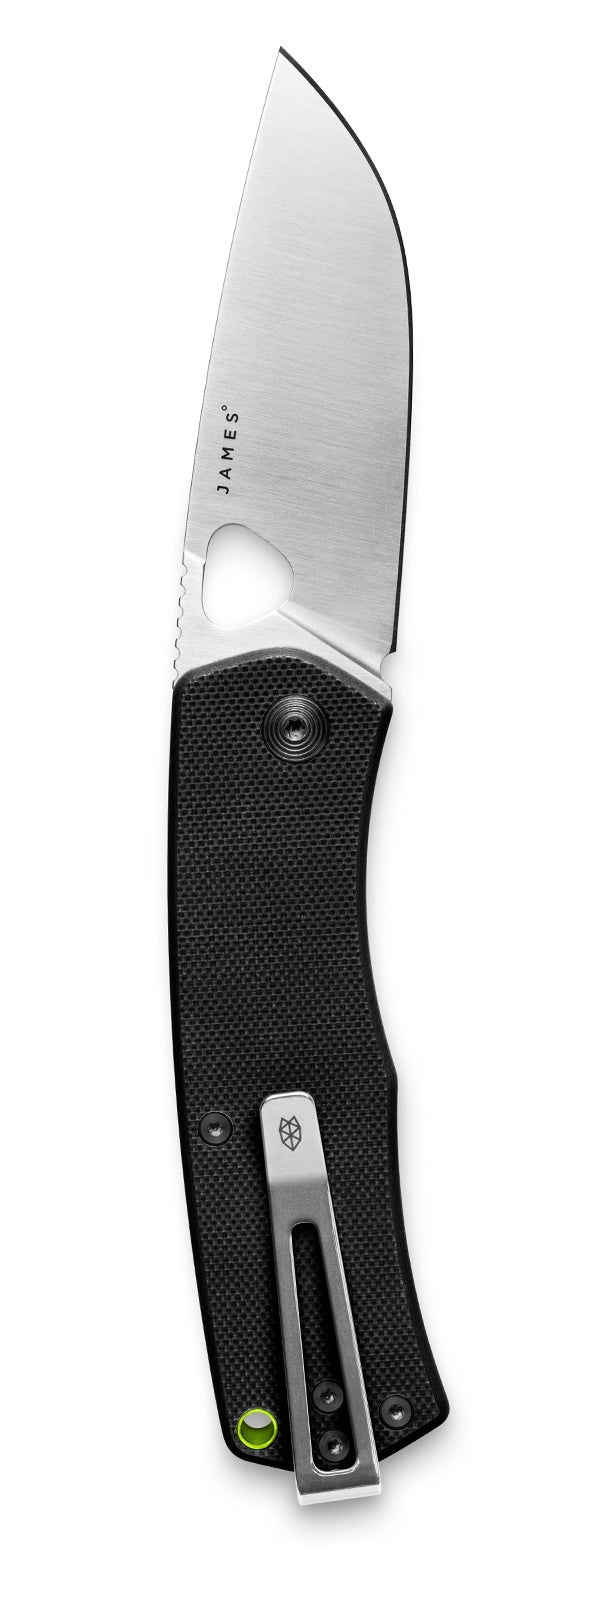 The Folsom knife, fully opened with the blade visible.